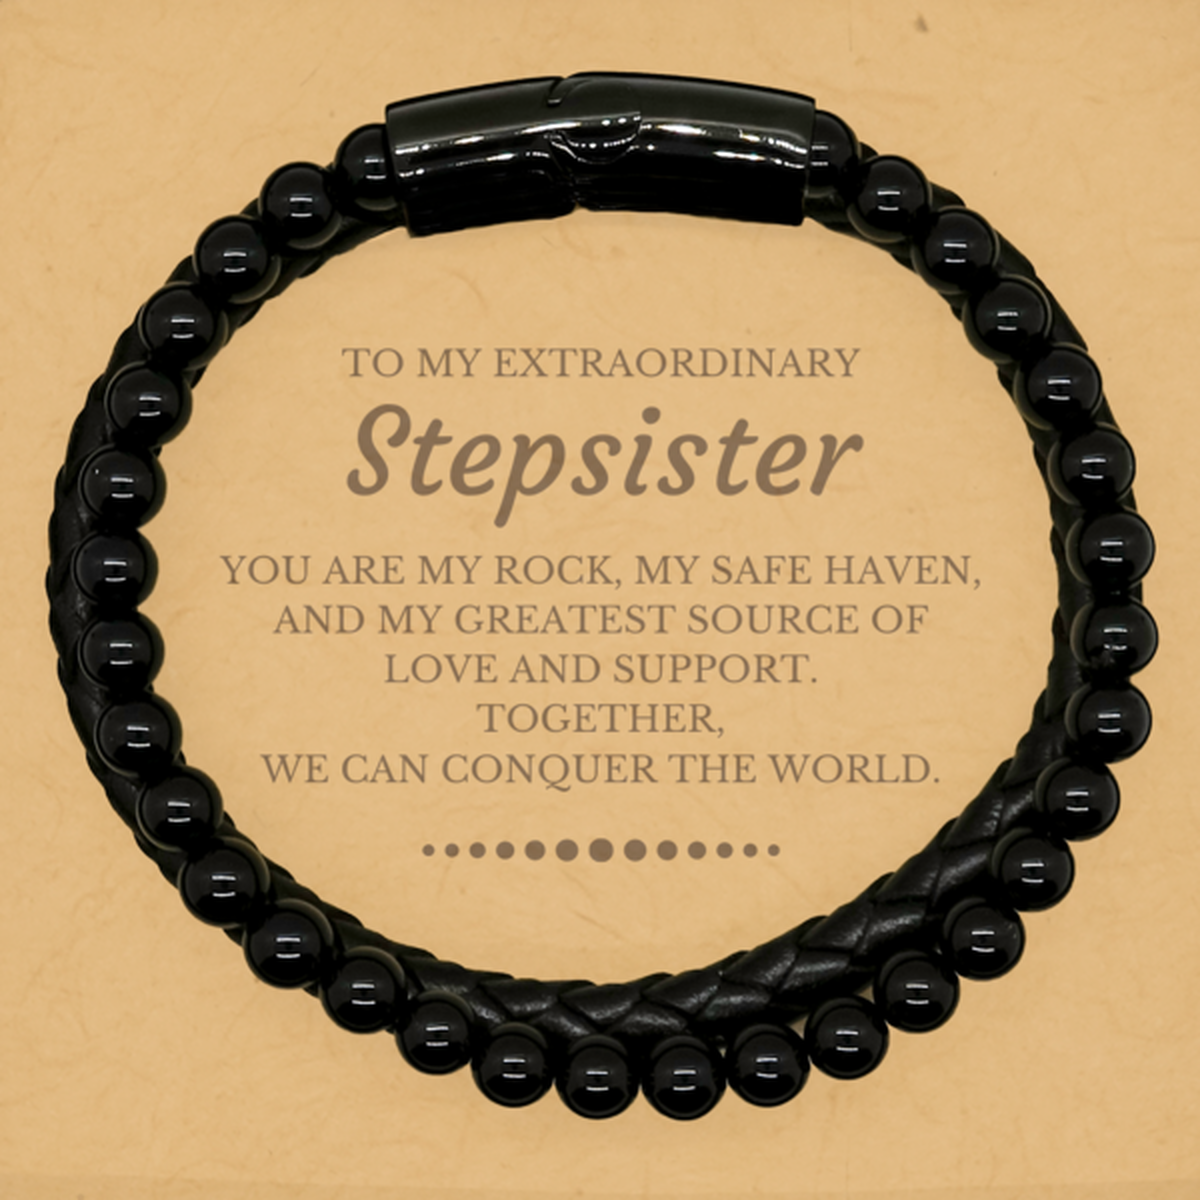 To My Extraordinary Stepsister Gifts, Together, we can conquer the world, Birthday Stone Leather Bracelets For Stepsister, Christmas Gifts For Stepsister